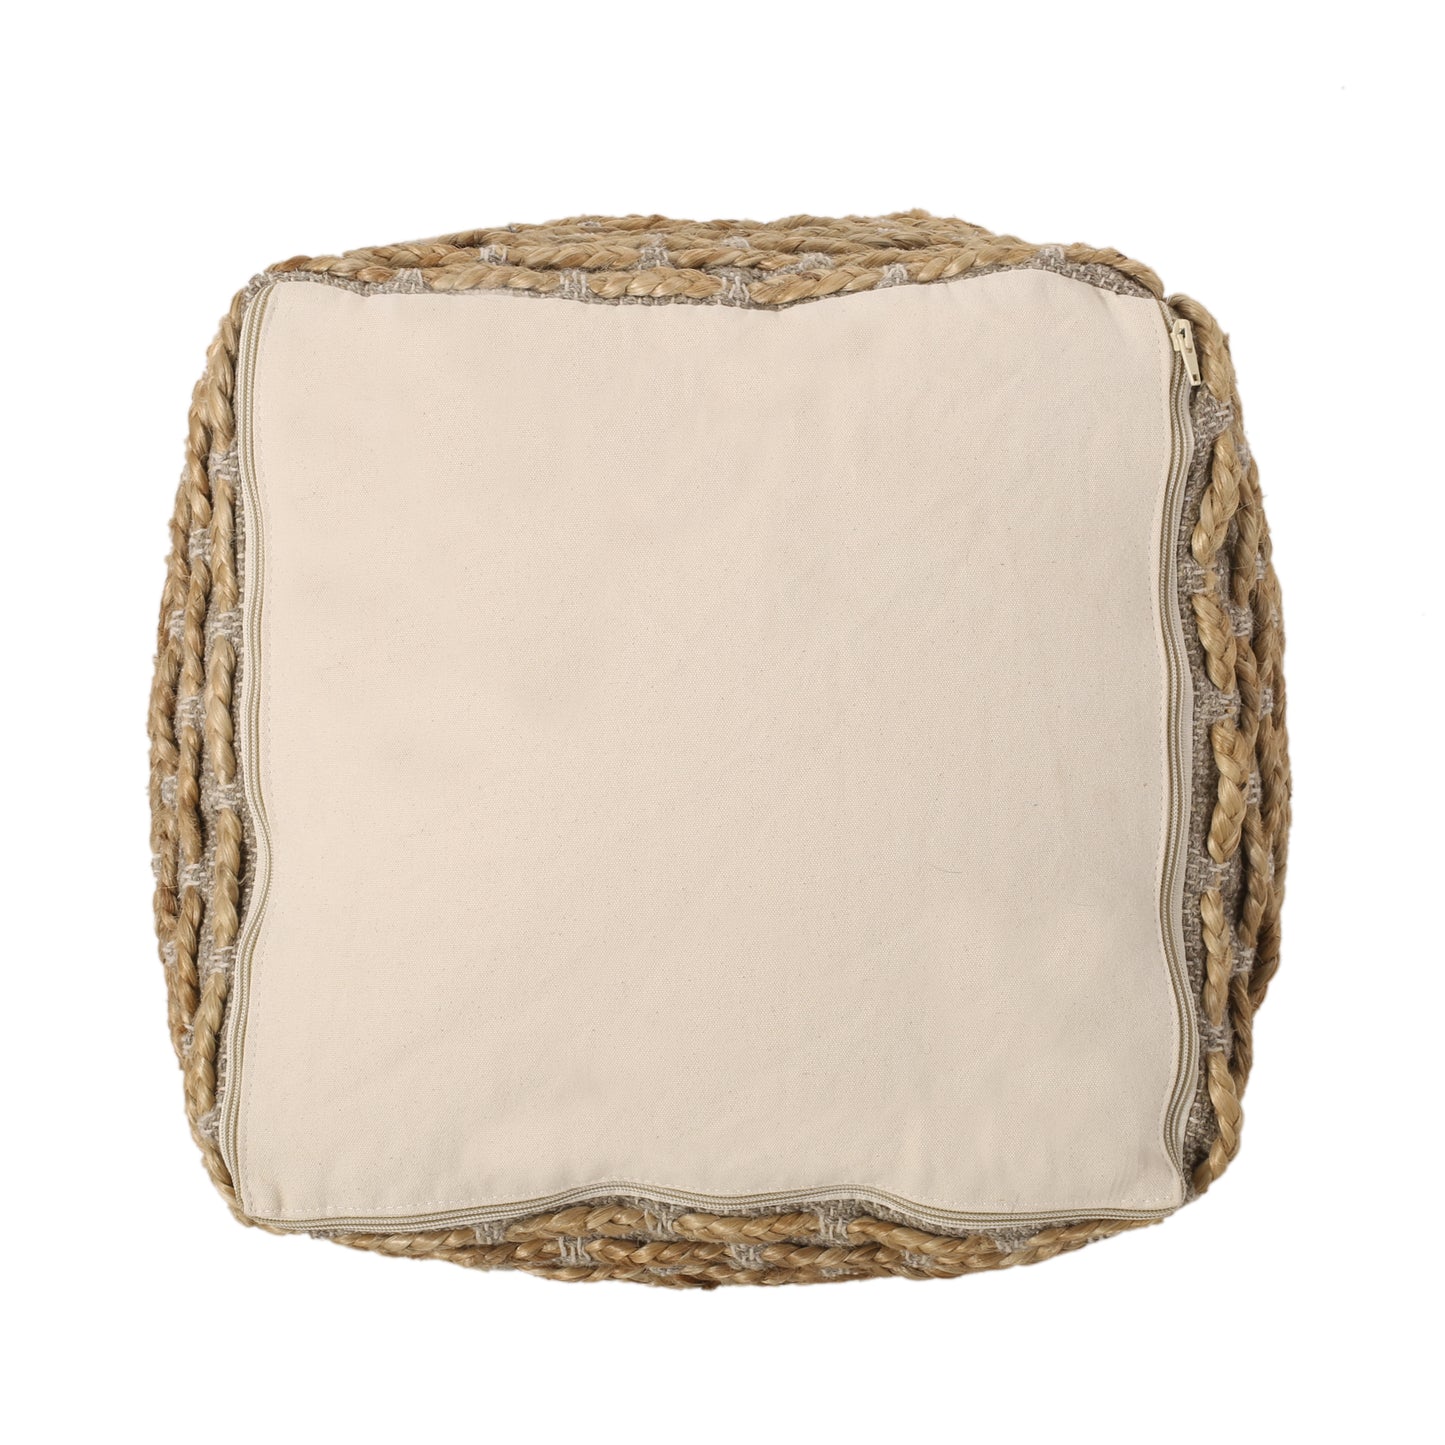 Berea Boho Handcrafted Fabric Cube Pouf, Natural